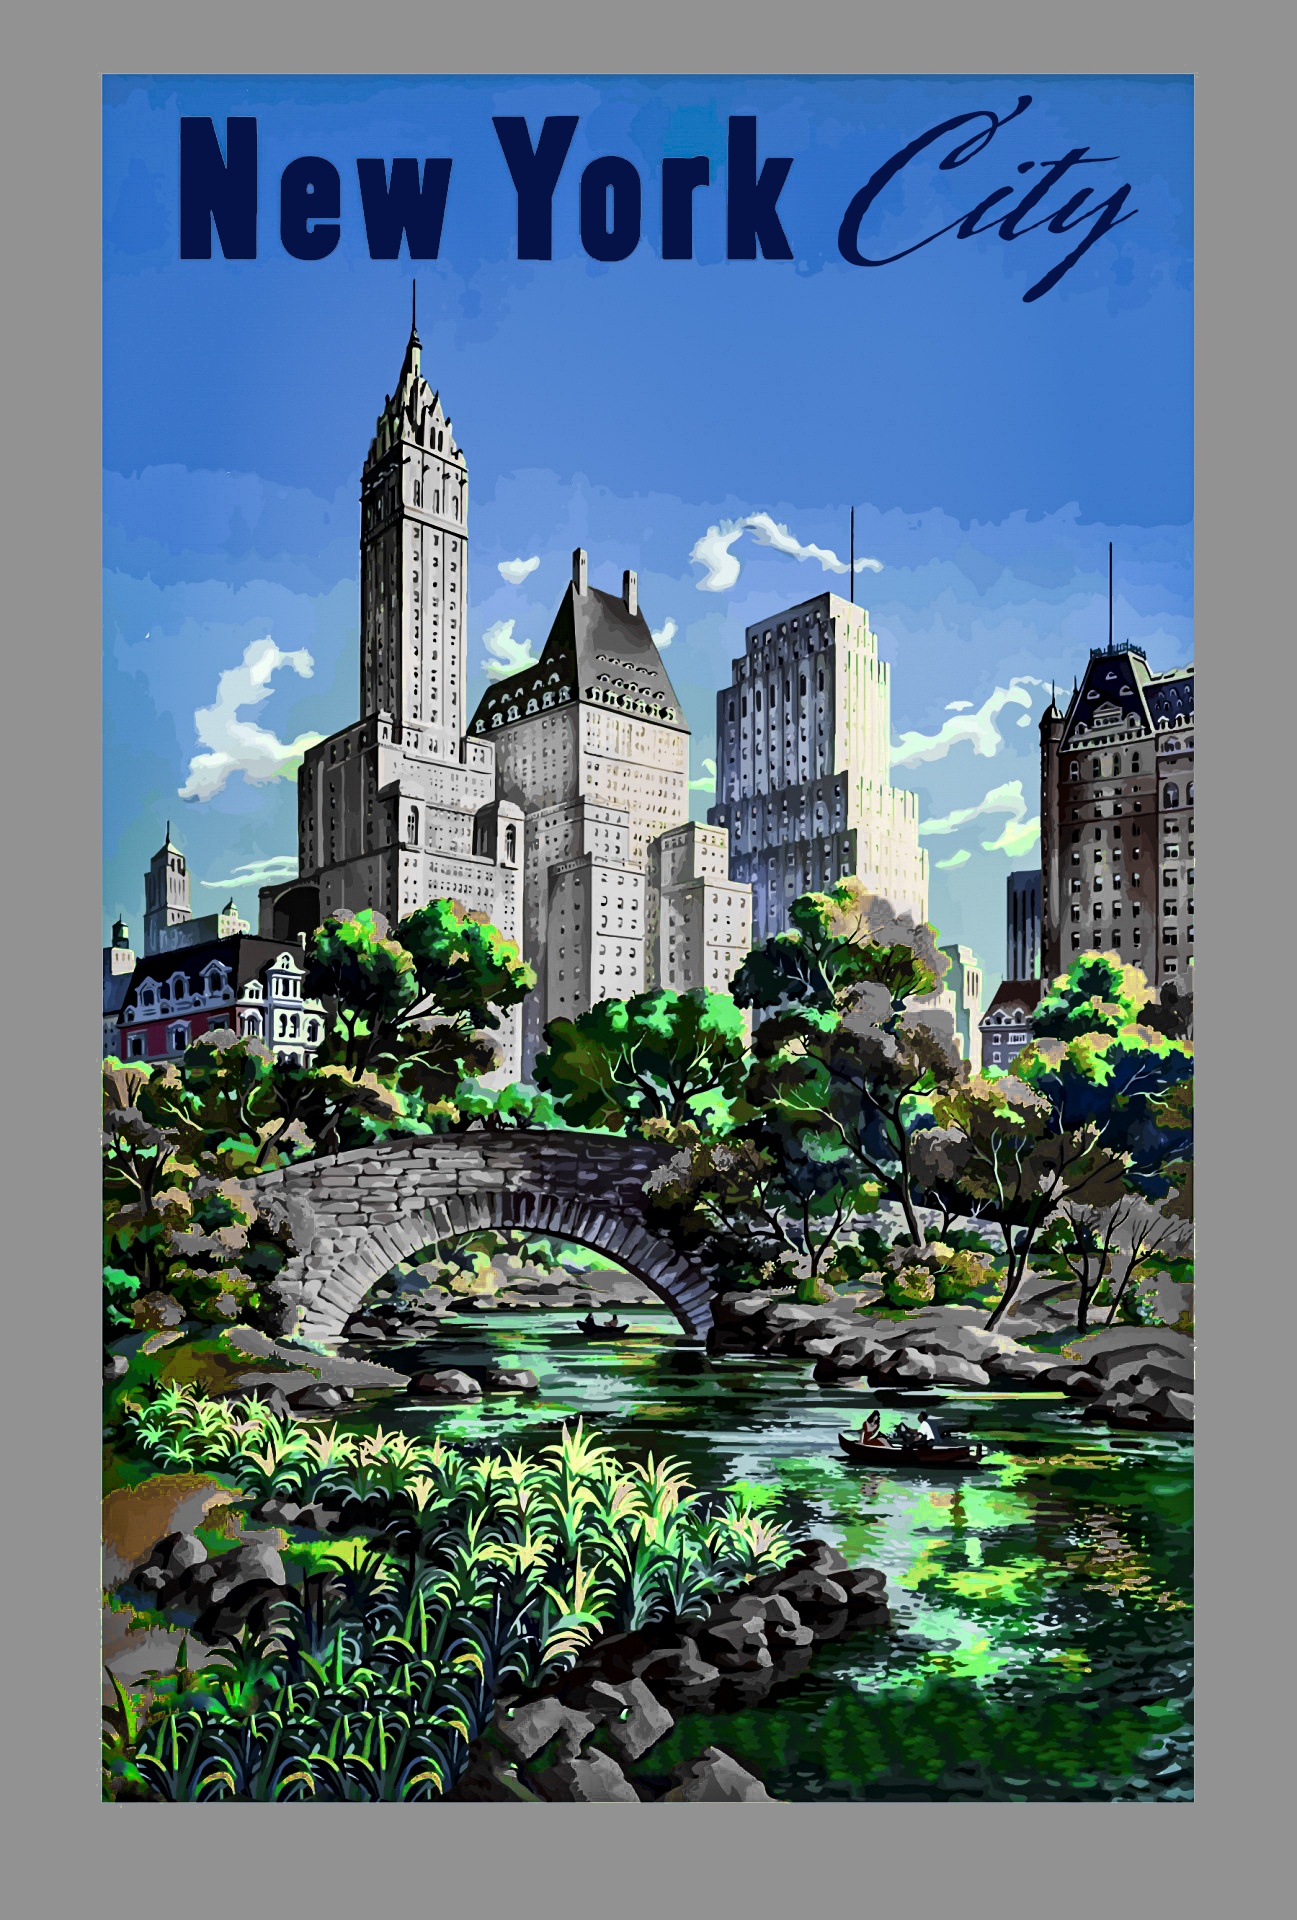 New York City and green garden water flow and bridge view